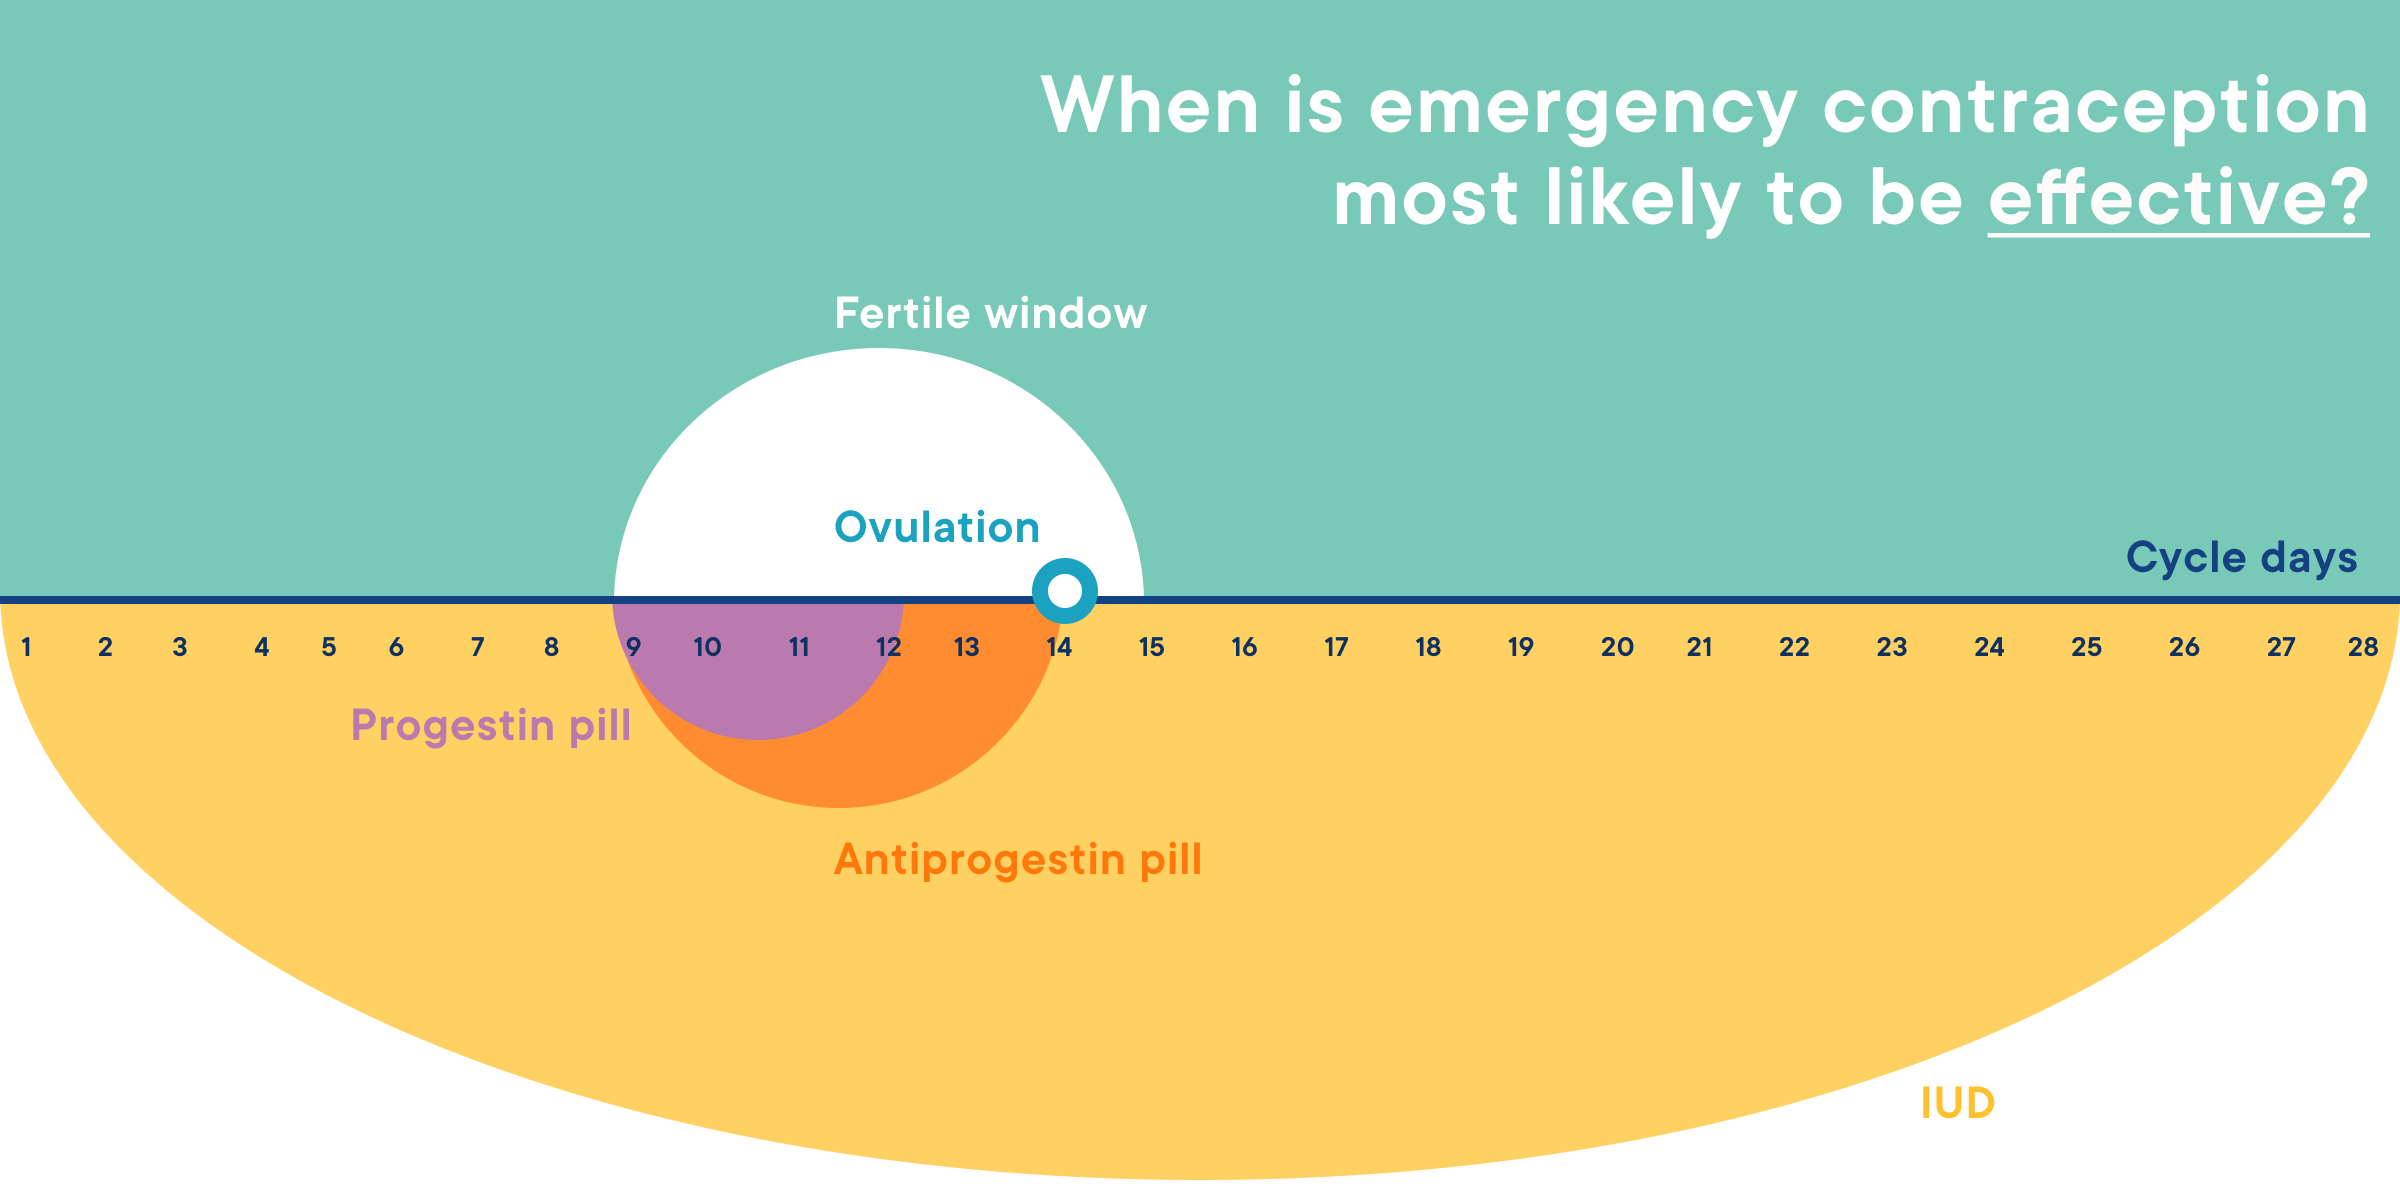 How effective is the morning-after pill and emergency contraception?